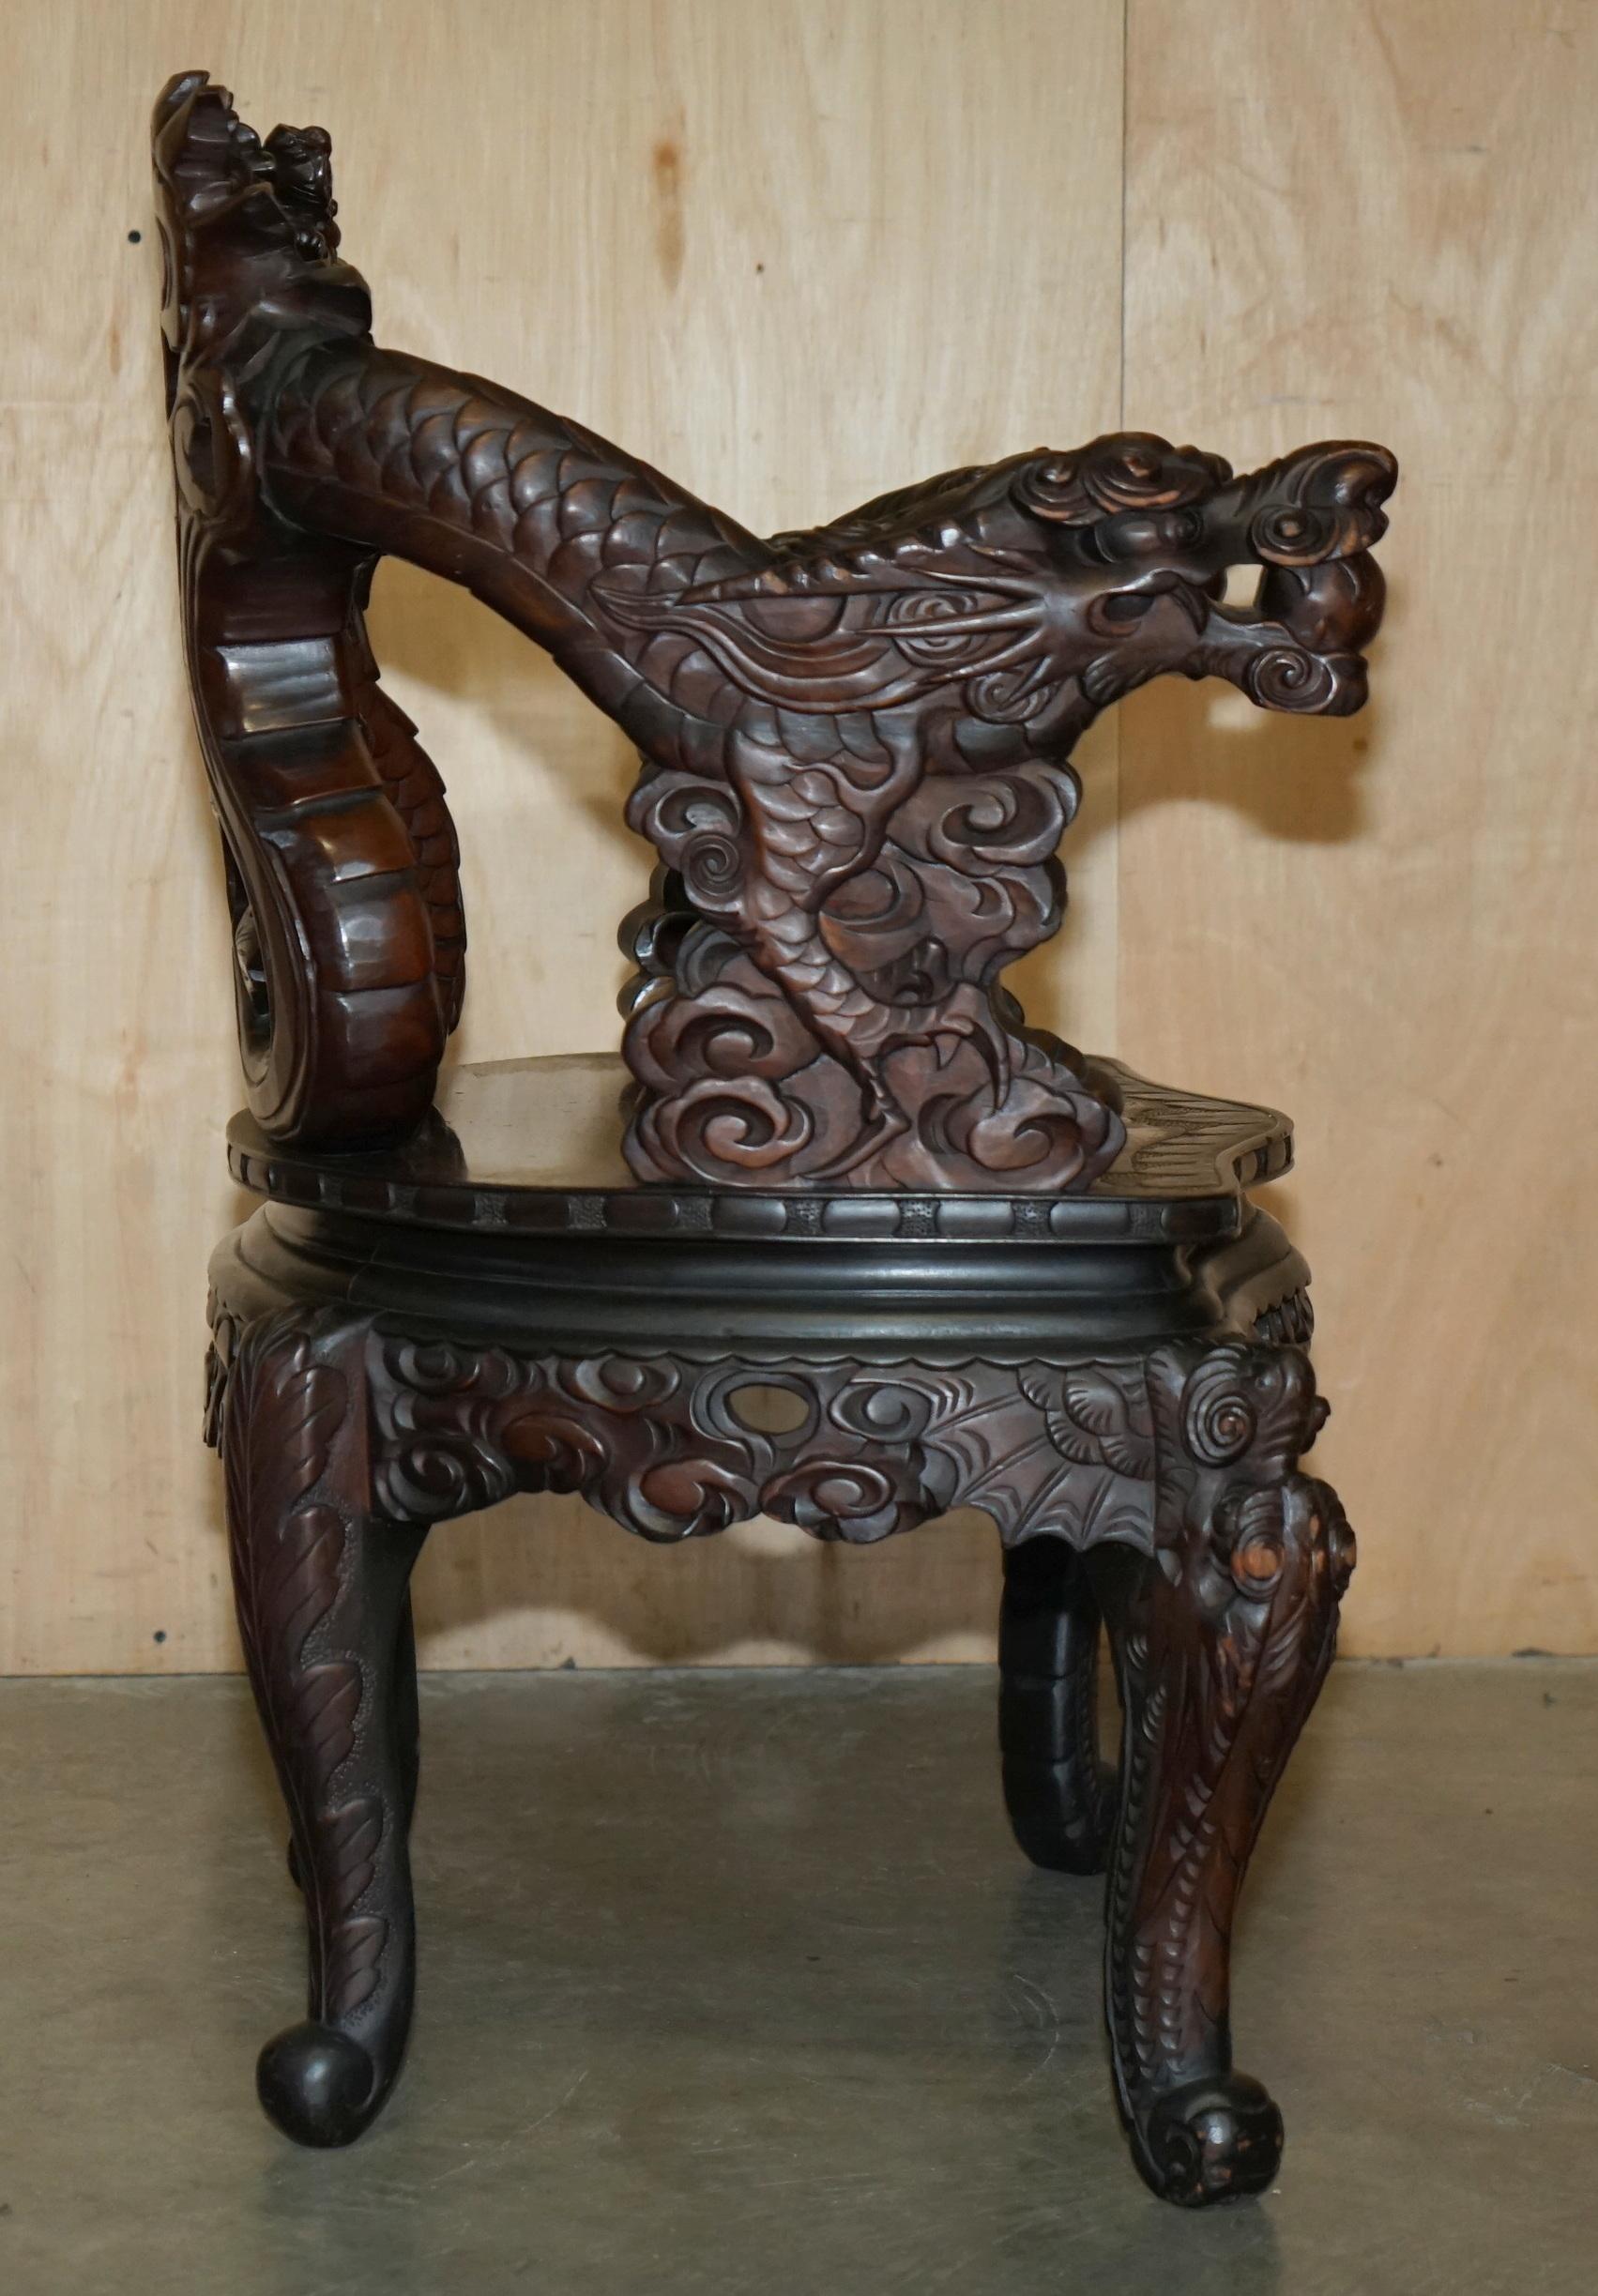 EXQUISITE CIRCA 1880 QING DYNASTY CARVED HARDWOOD CHINESE DRAGON ARMCHAiR For Sale 7